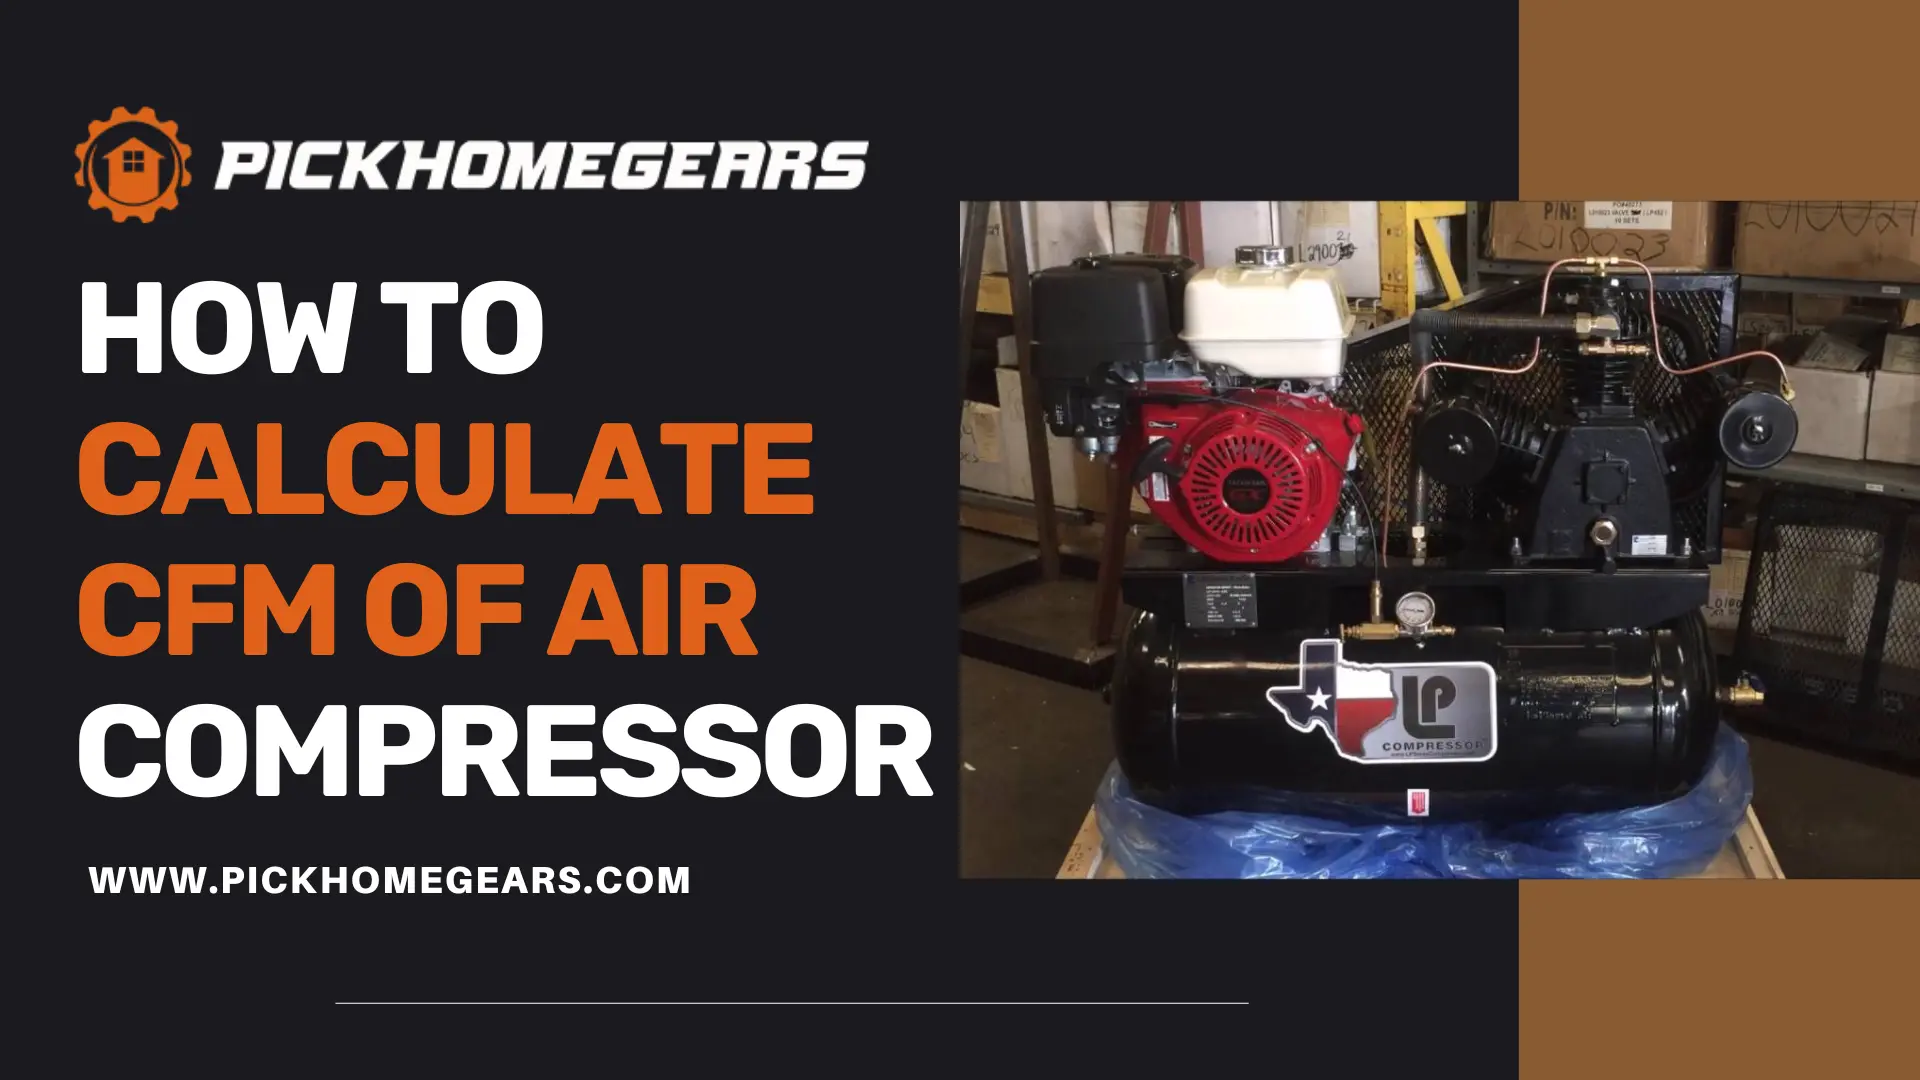 How To Calculate CFM Of Air Compressor